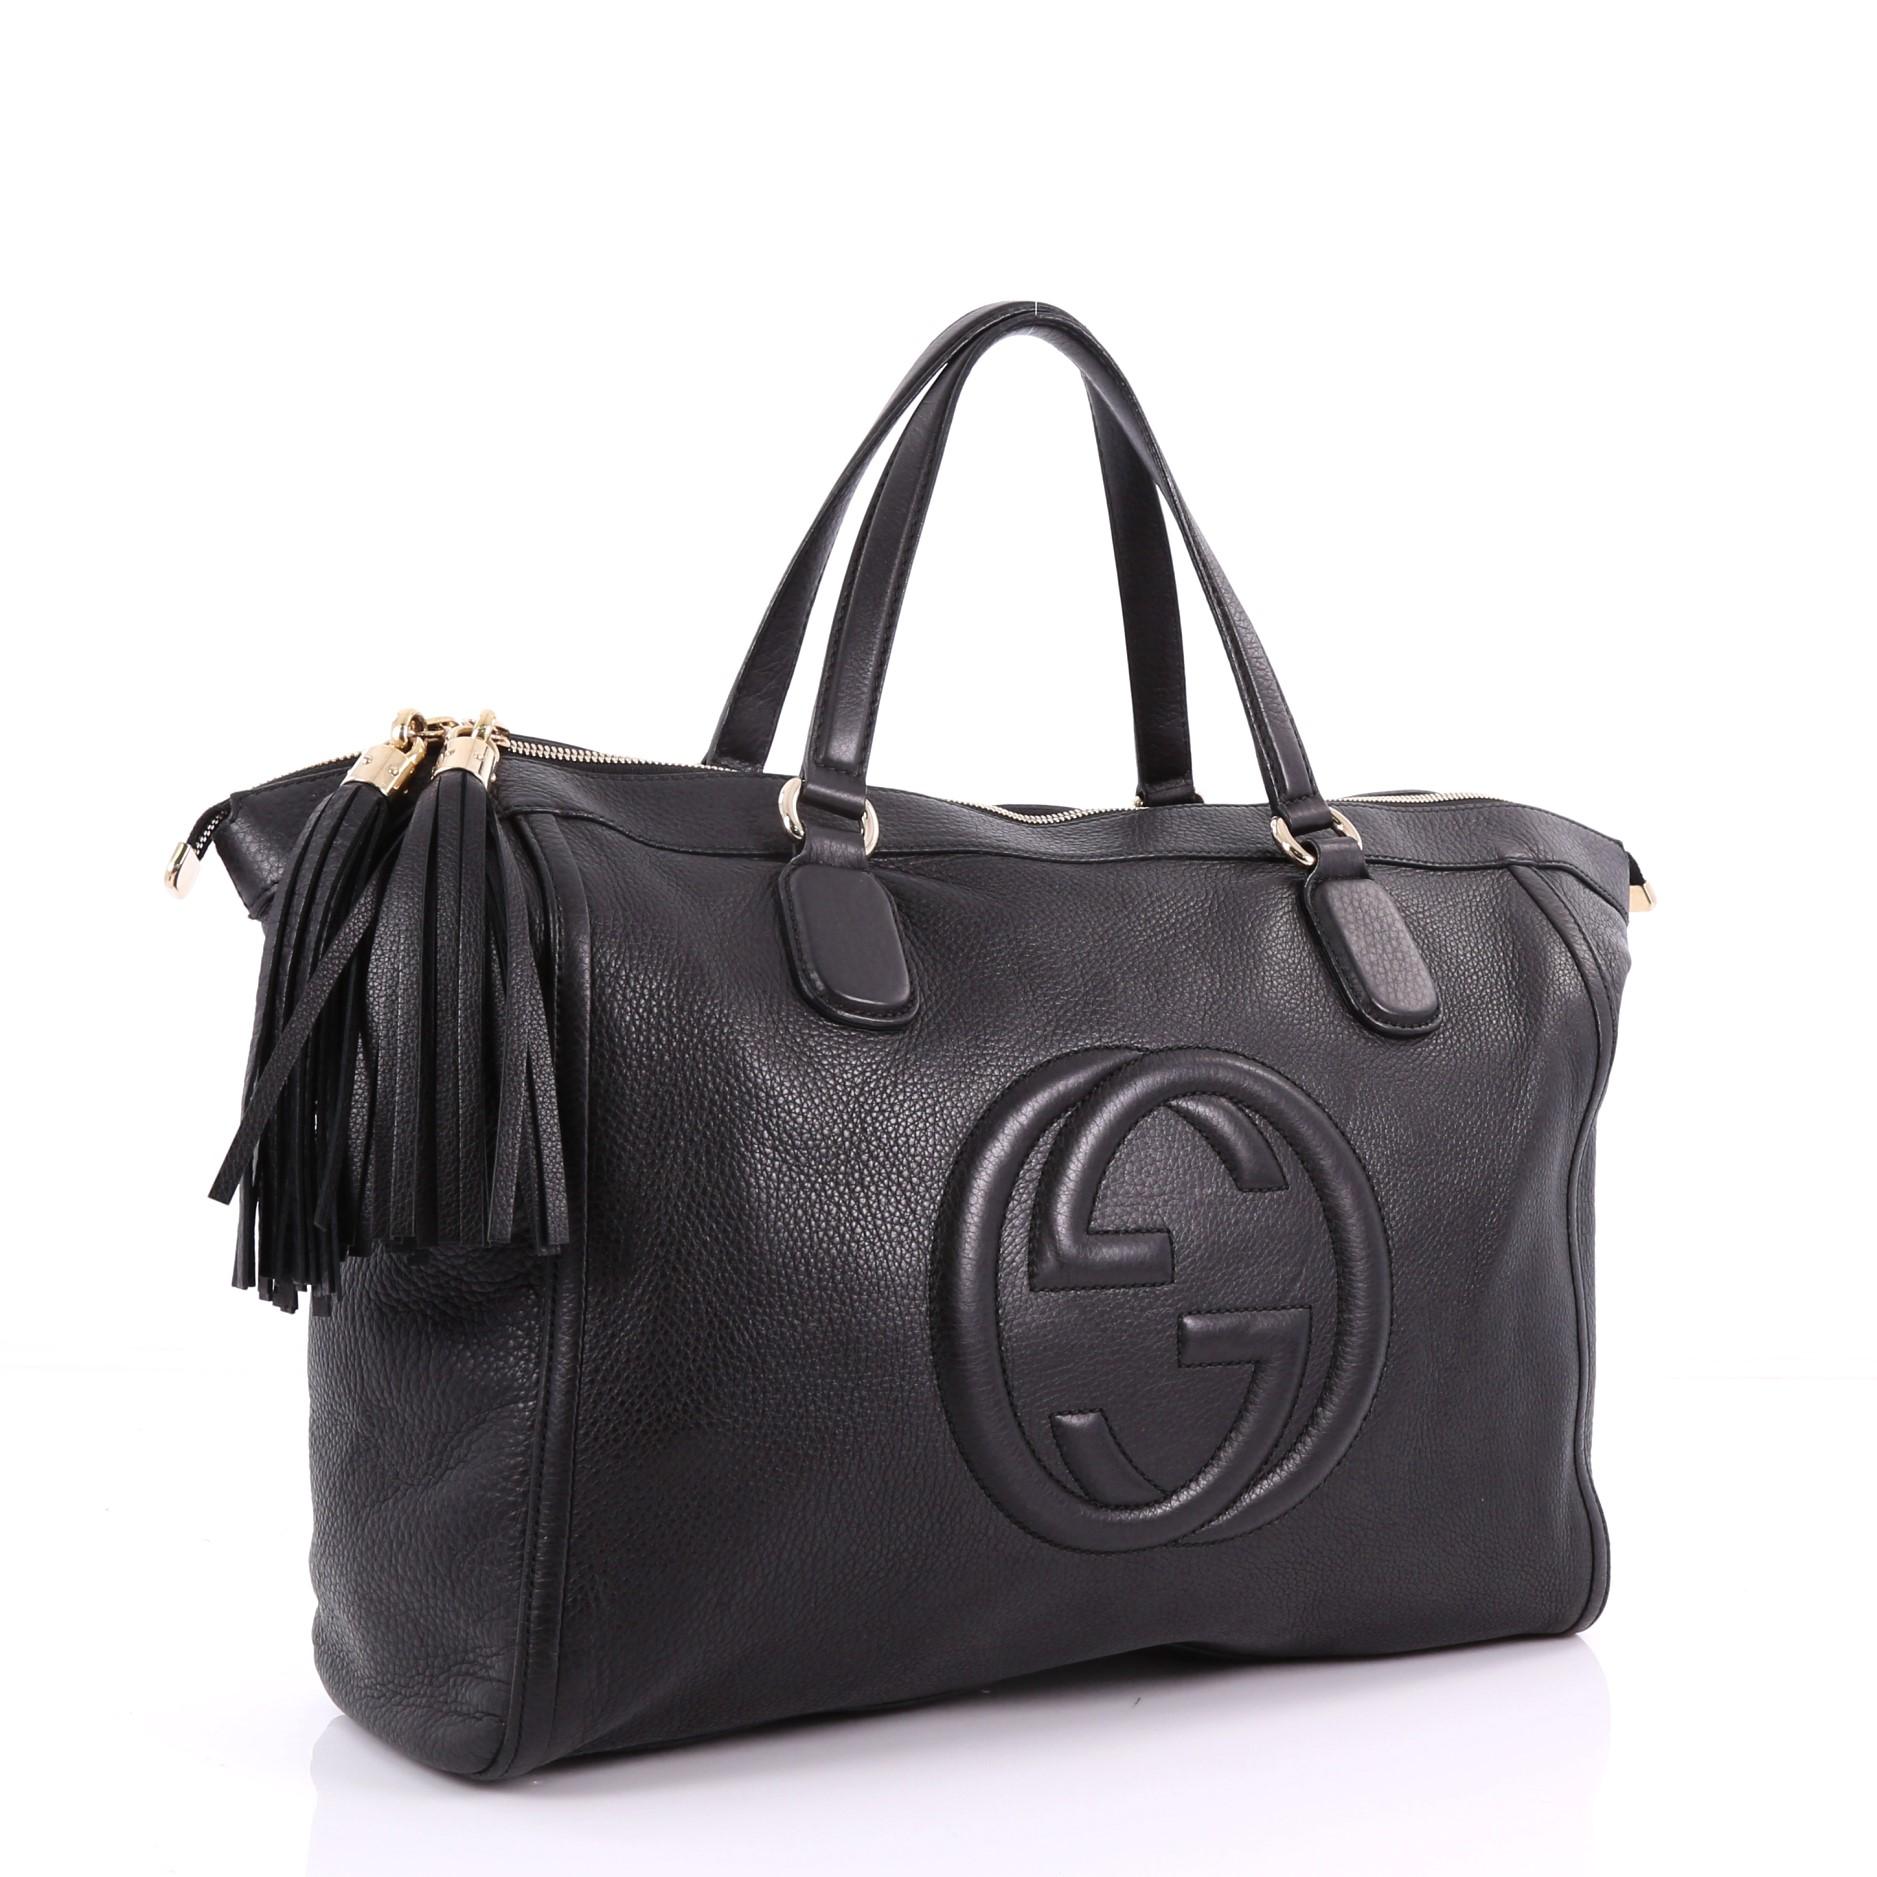 Black Gucci Soho Zip Tote Leather Large